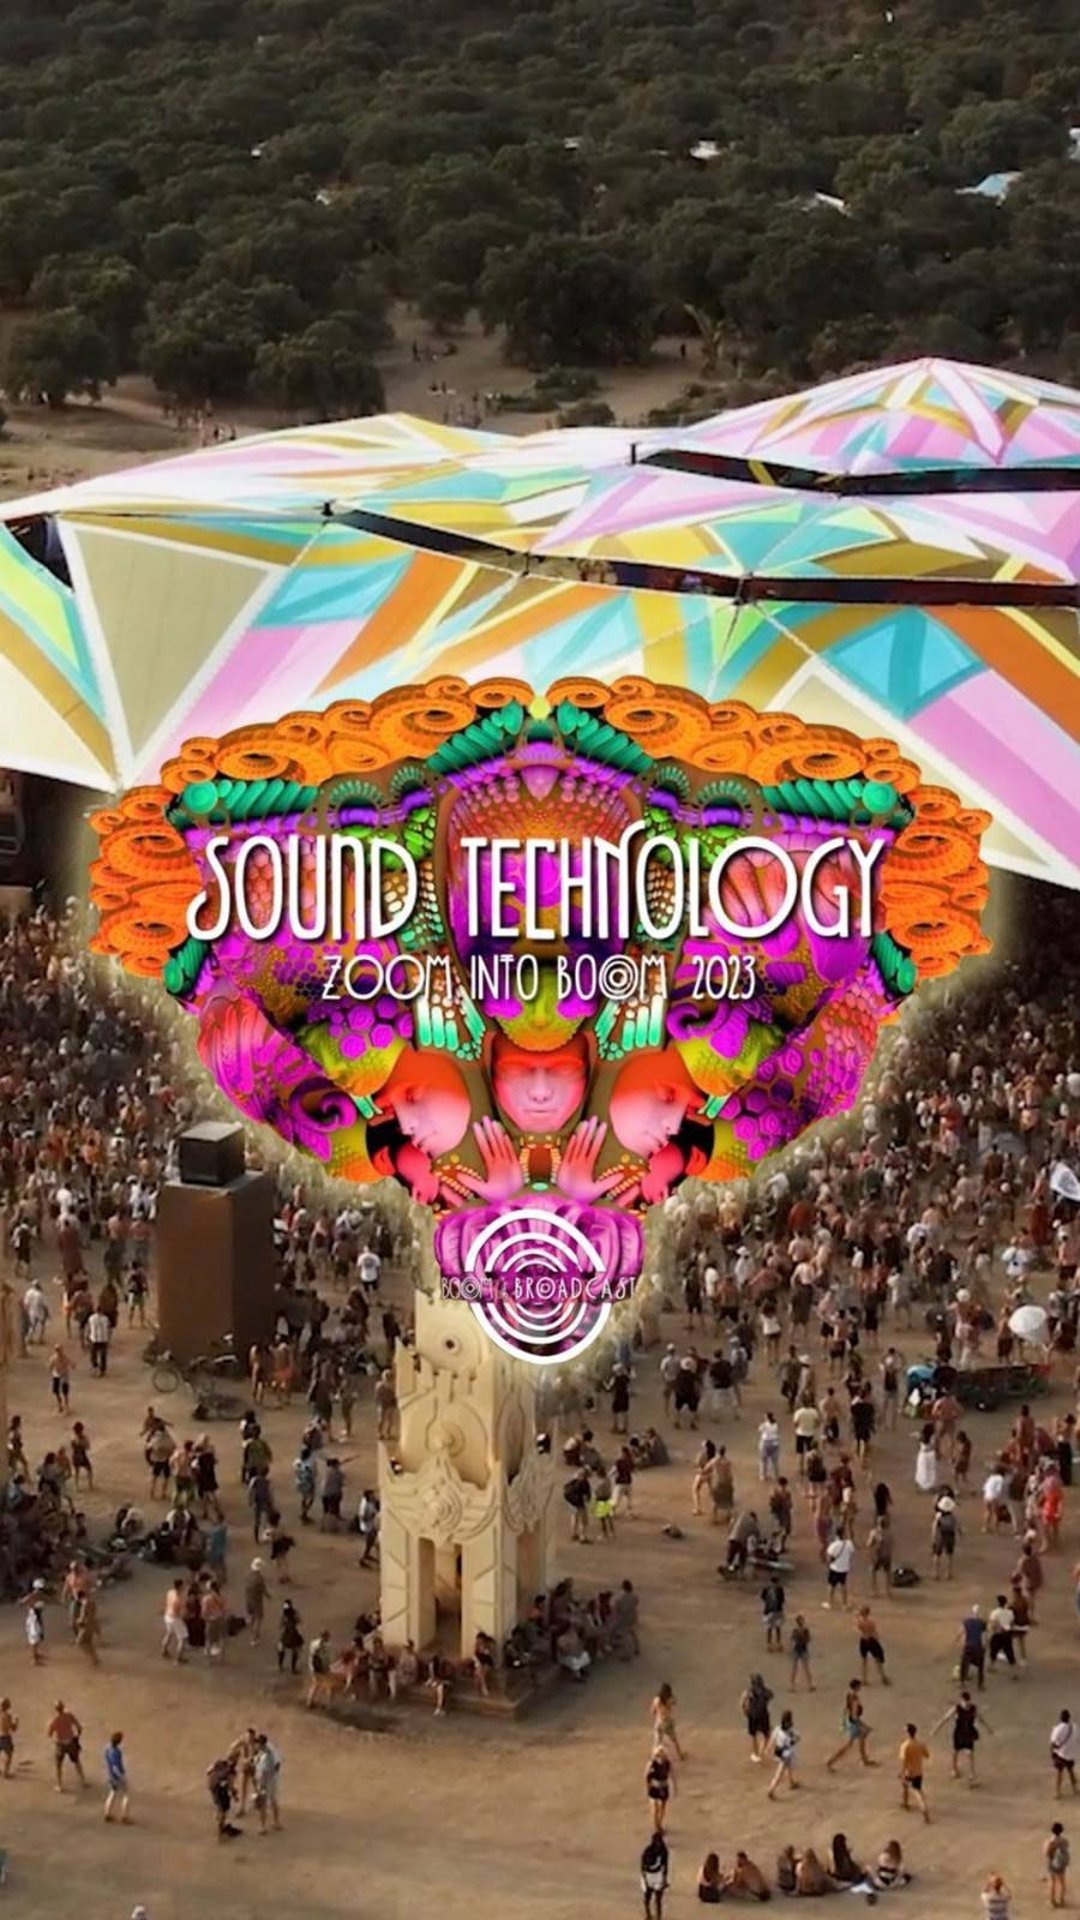 🌟 The countdown to Boom Festival 2025 has officially begun!

To kick off this exciting journey, we’re thrilled to introduce the first episode of our “Zoom Into Boom” series. 🎬✨

Get ready for an exclusive look behind the scenes into the heart of Boom – its projects, visions, and the sacred Boomland. 🌍💫

#BoomFestival is rooted in psychedelic music, so our debut episode is all about “Sound Technology” 🎶🔊

🌀 Discover the cutting-edge stage technologies and sound systems that enable artists to share their art in the most incredible way, creating the perfect atmosphere for Boomers to dance their hearts out.

🎧🎵 And speaking of sound, we’re excited to announce that the #BoomlandSchool will reopen its doors for a Psytrance Music Production course from 26 to 29 September 2024.

🌱🏡 For those passionate about the environment, join us for our Natural Building course from 12 to 15 September 2024.

Find more information at boomland.eu

Let’s make this journey unforgettable together!

Live in Love

💜✨

#LiveInLove #Boomland #BoomFestival2023